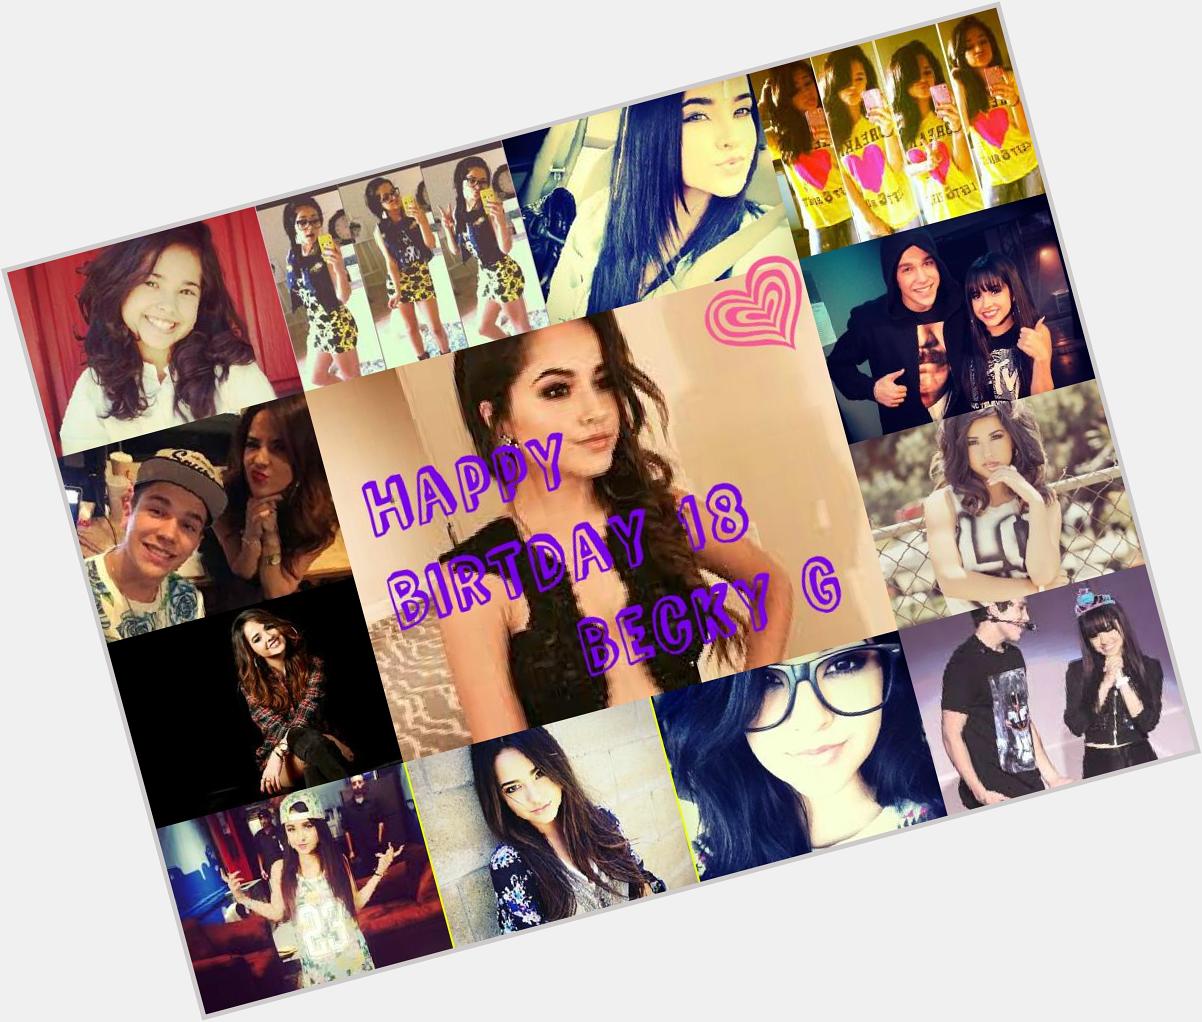  Rebecca Marie Gomez I love you I\m Beaster heart and count on me for all
Happy Birthday Becky G     